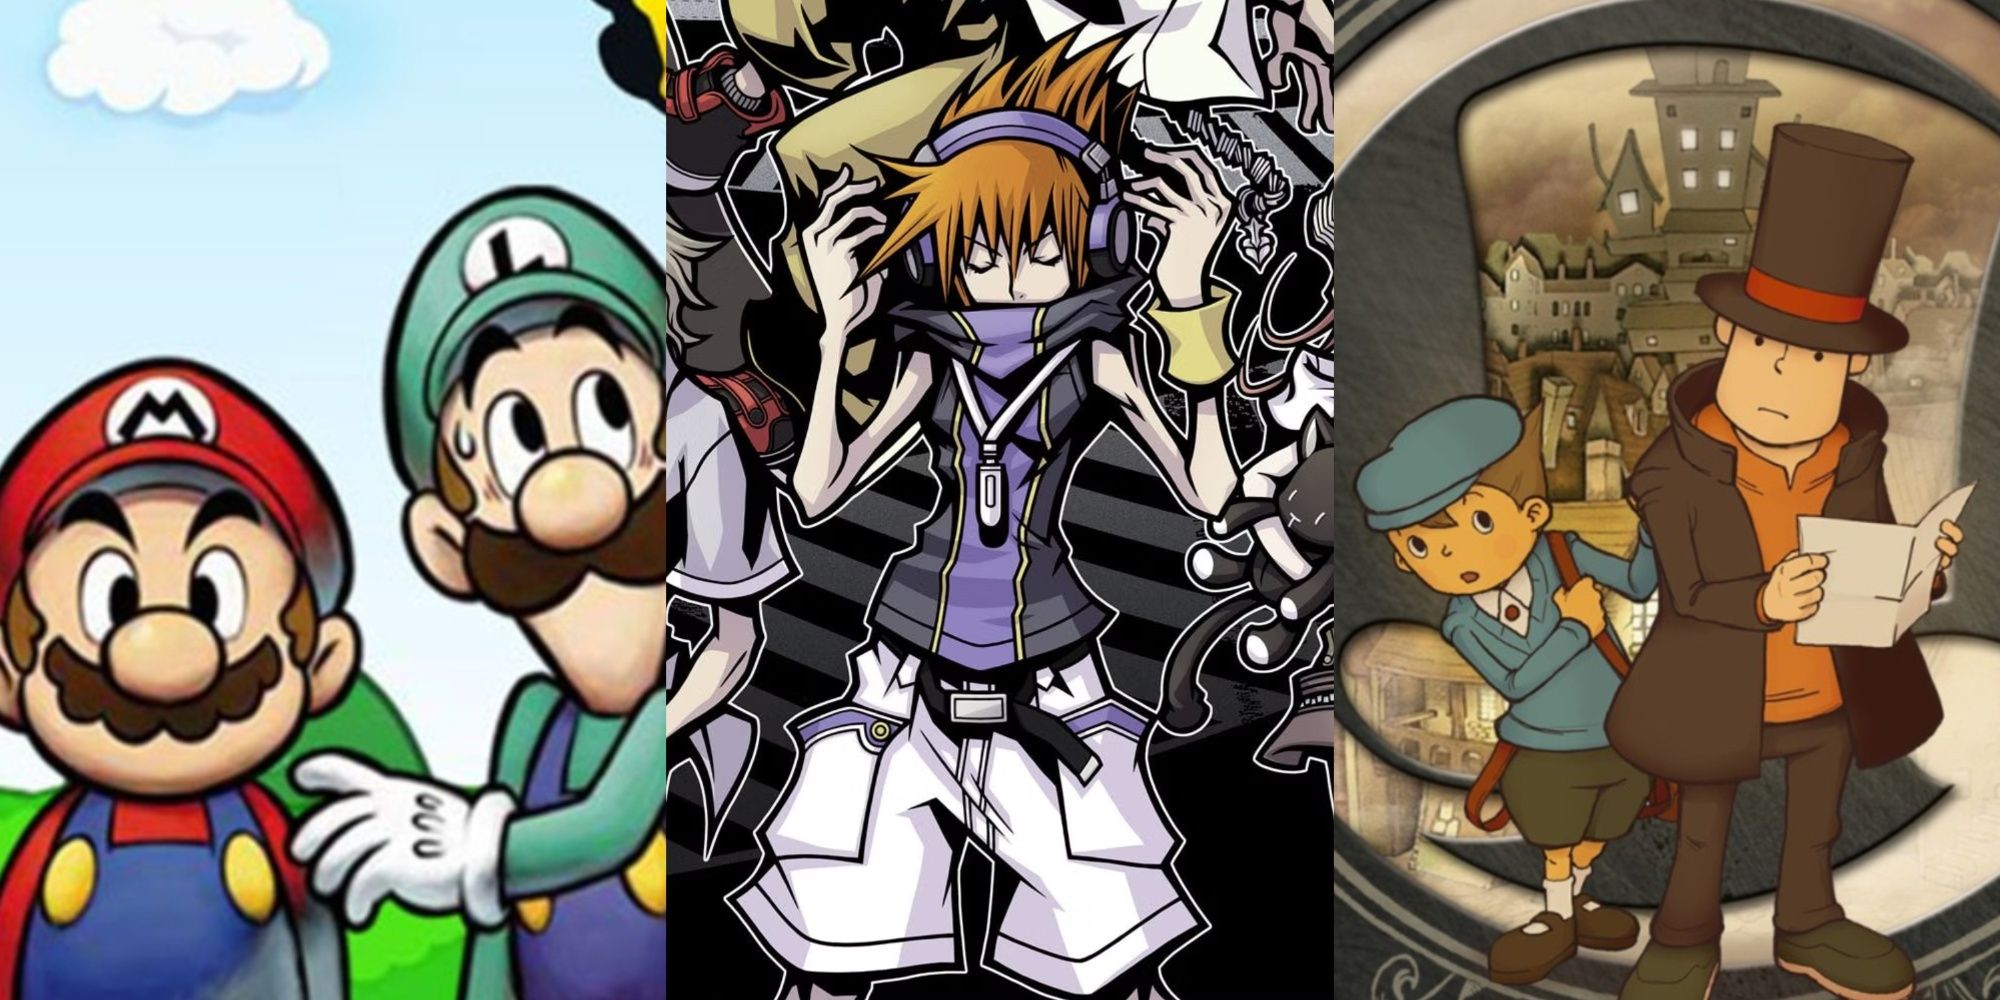 The Top Ten Greatest (Best) Nintendo DS games of all time - DS - Feature 